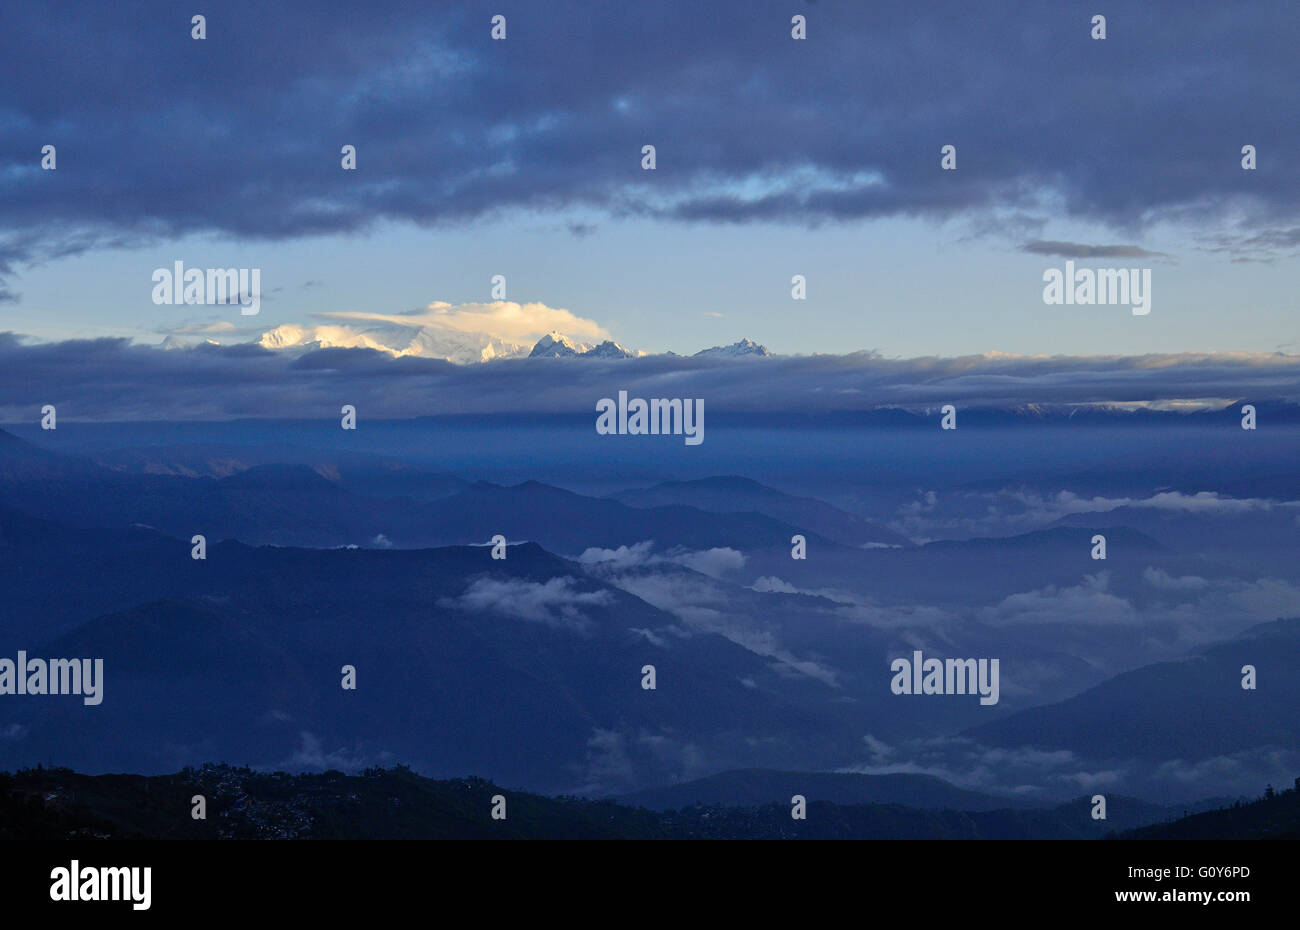 Mt.Kanchenjunga, the Third Highest mountain in the world at 8586 meters, at sunrise with hanging clouds around it, Sikkim, India Stock Photo